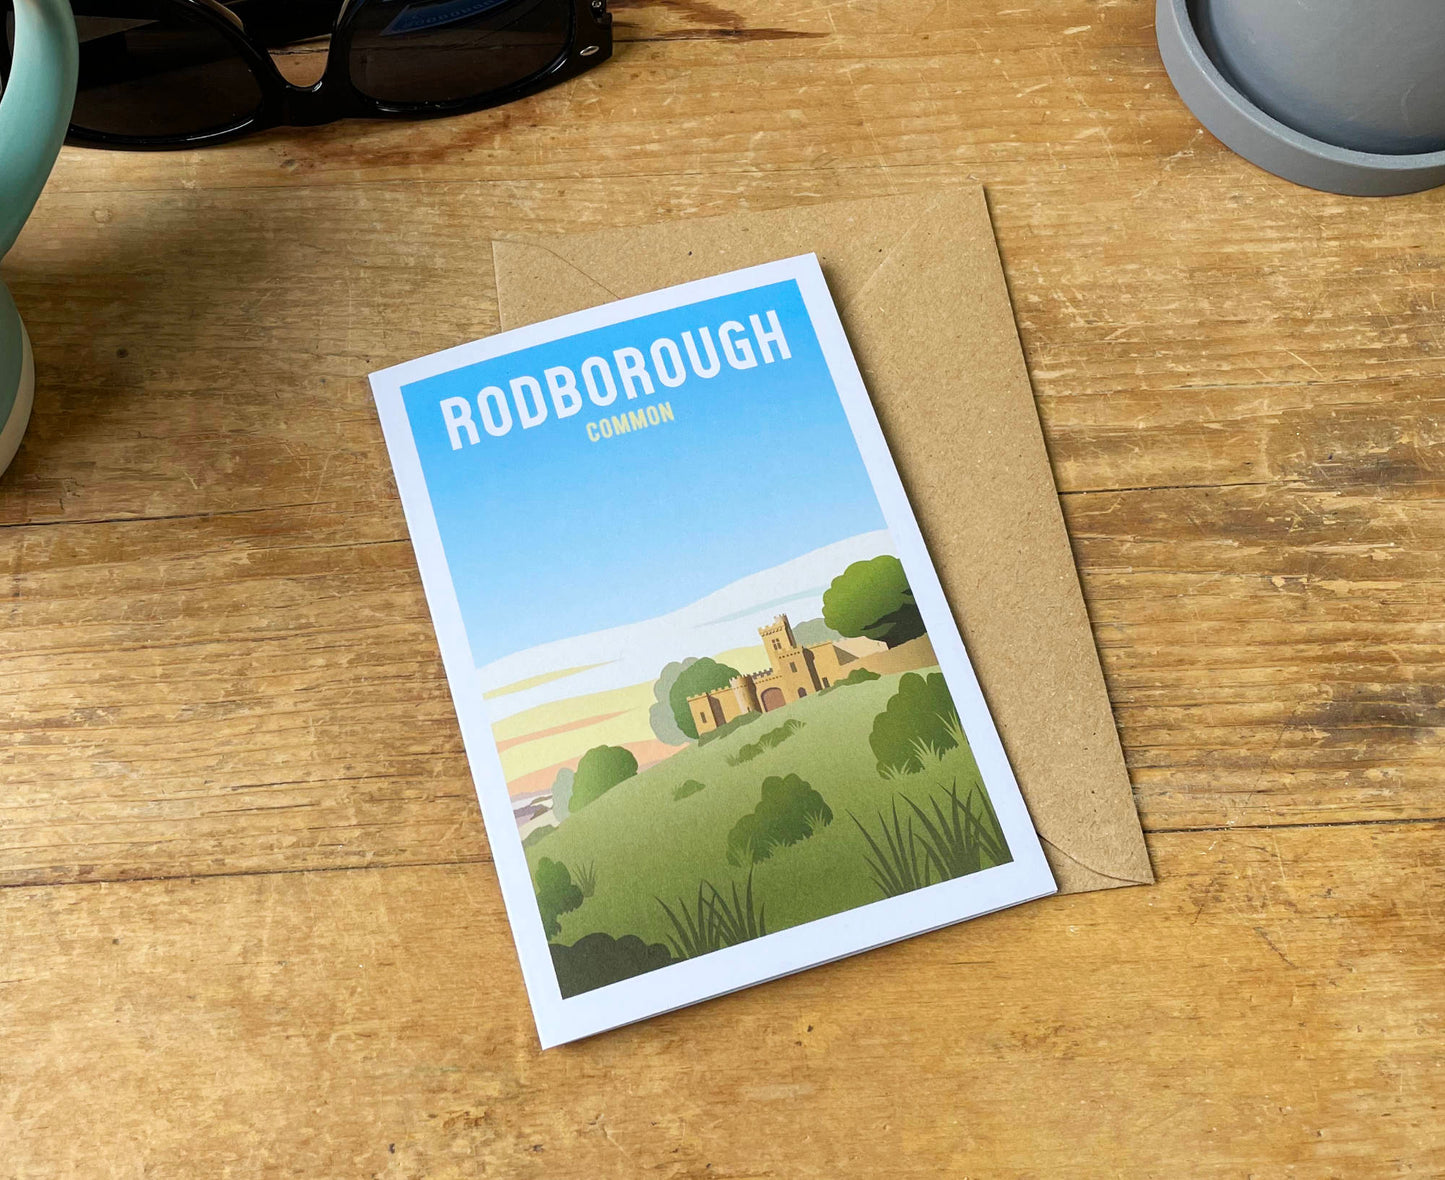 Rodborough Common Greeting Card on table with envelope